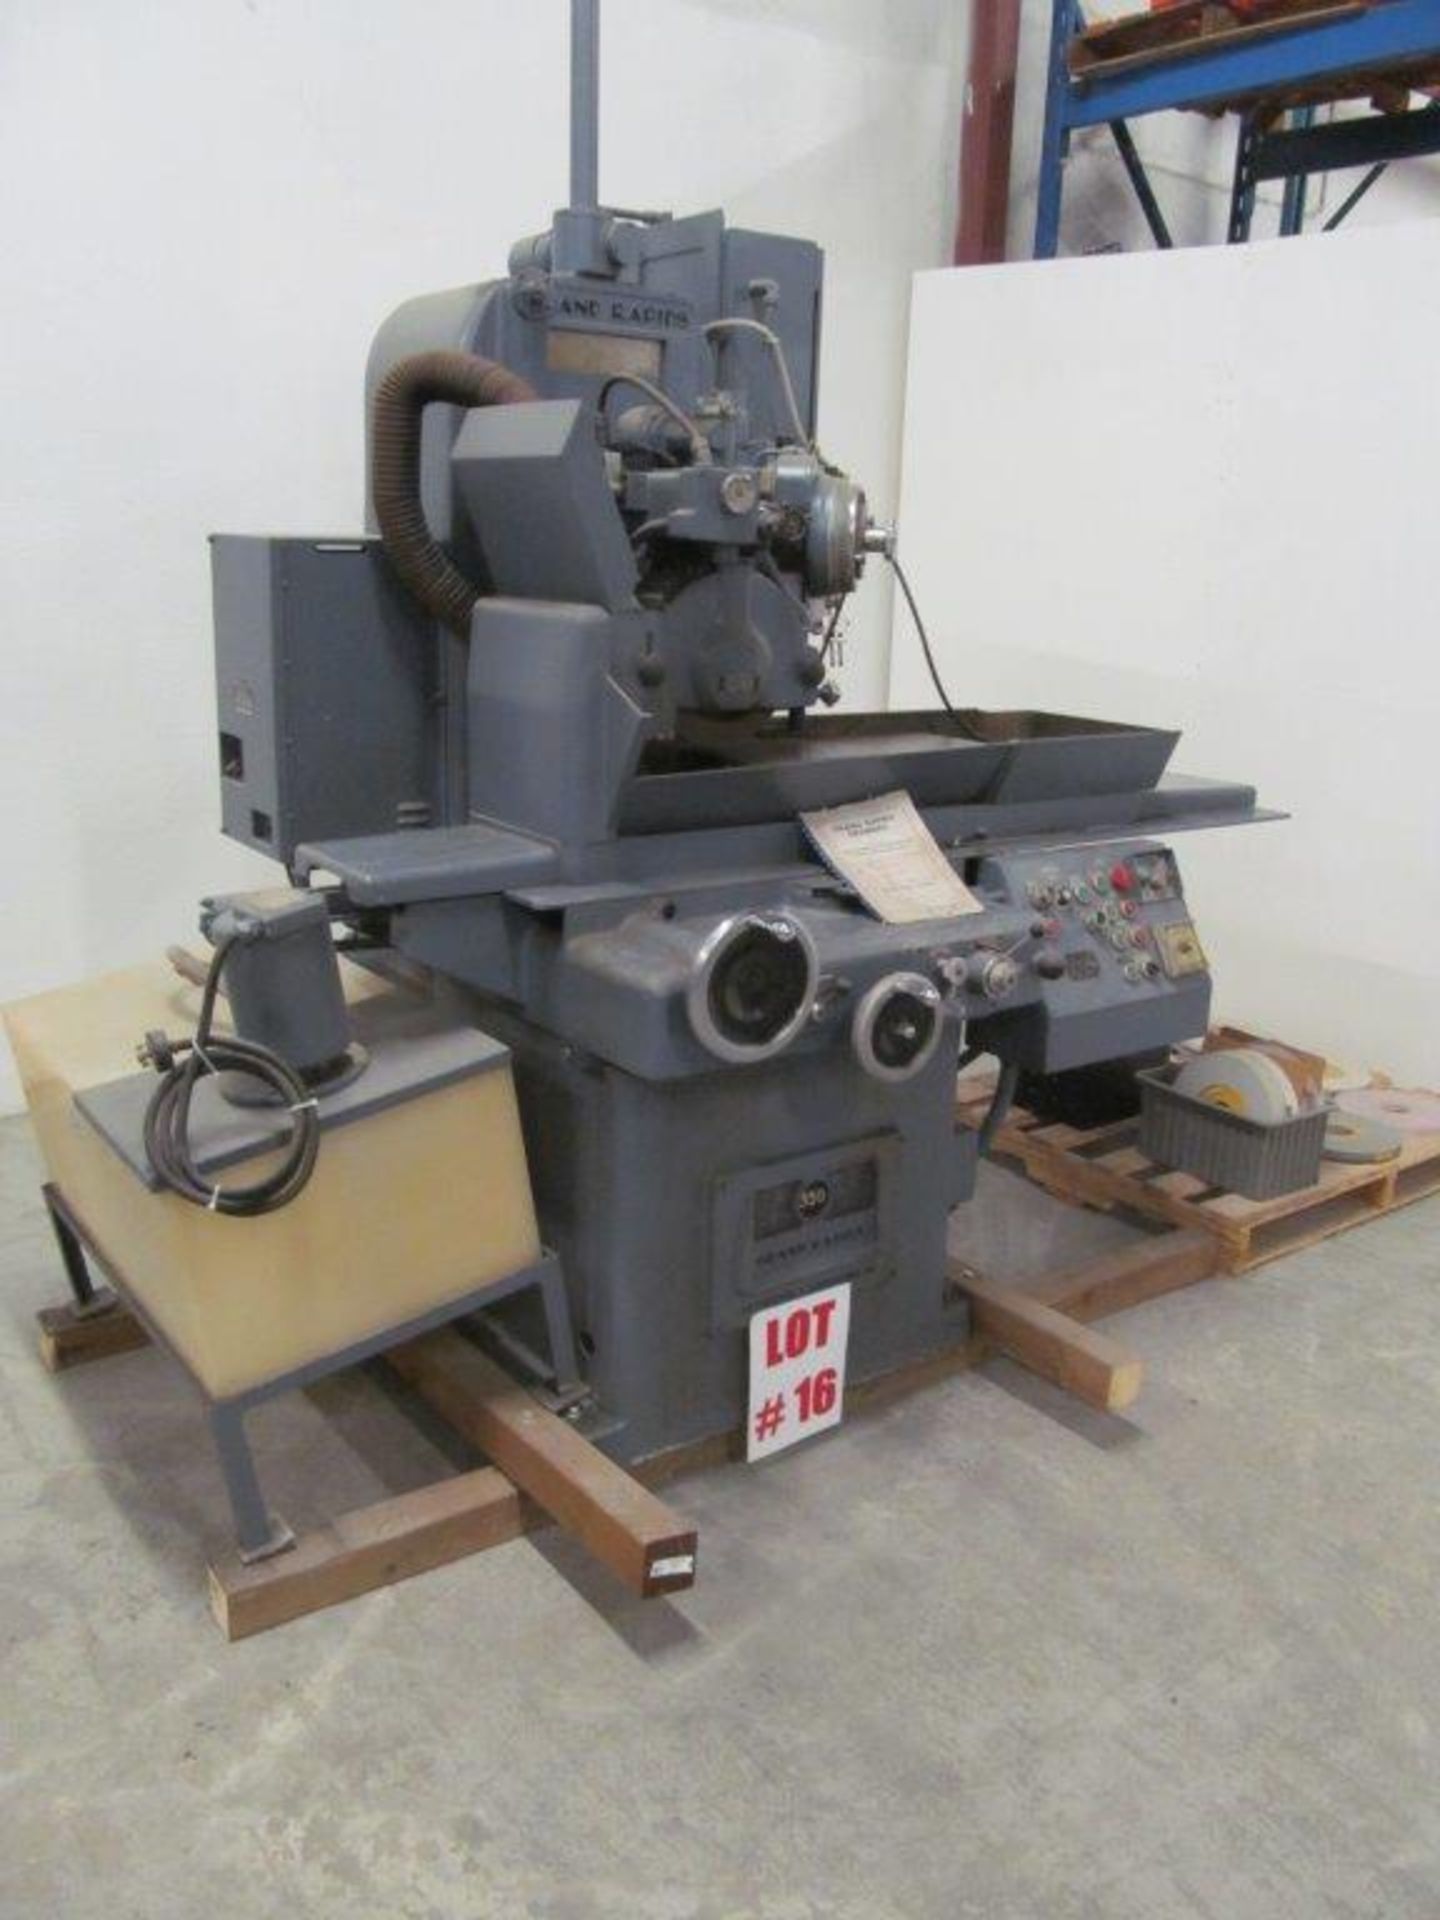 GRAND RAPIDS HYDRAULIC SURFACE GRINDER, CAPACITY: 8" X 24", C/W ELECTROMAGNETIC CHUCK & ASSORTED